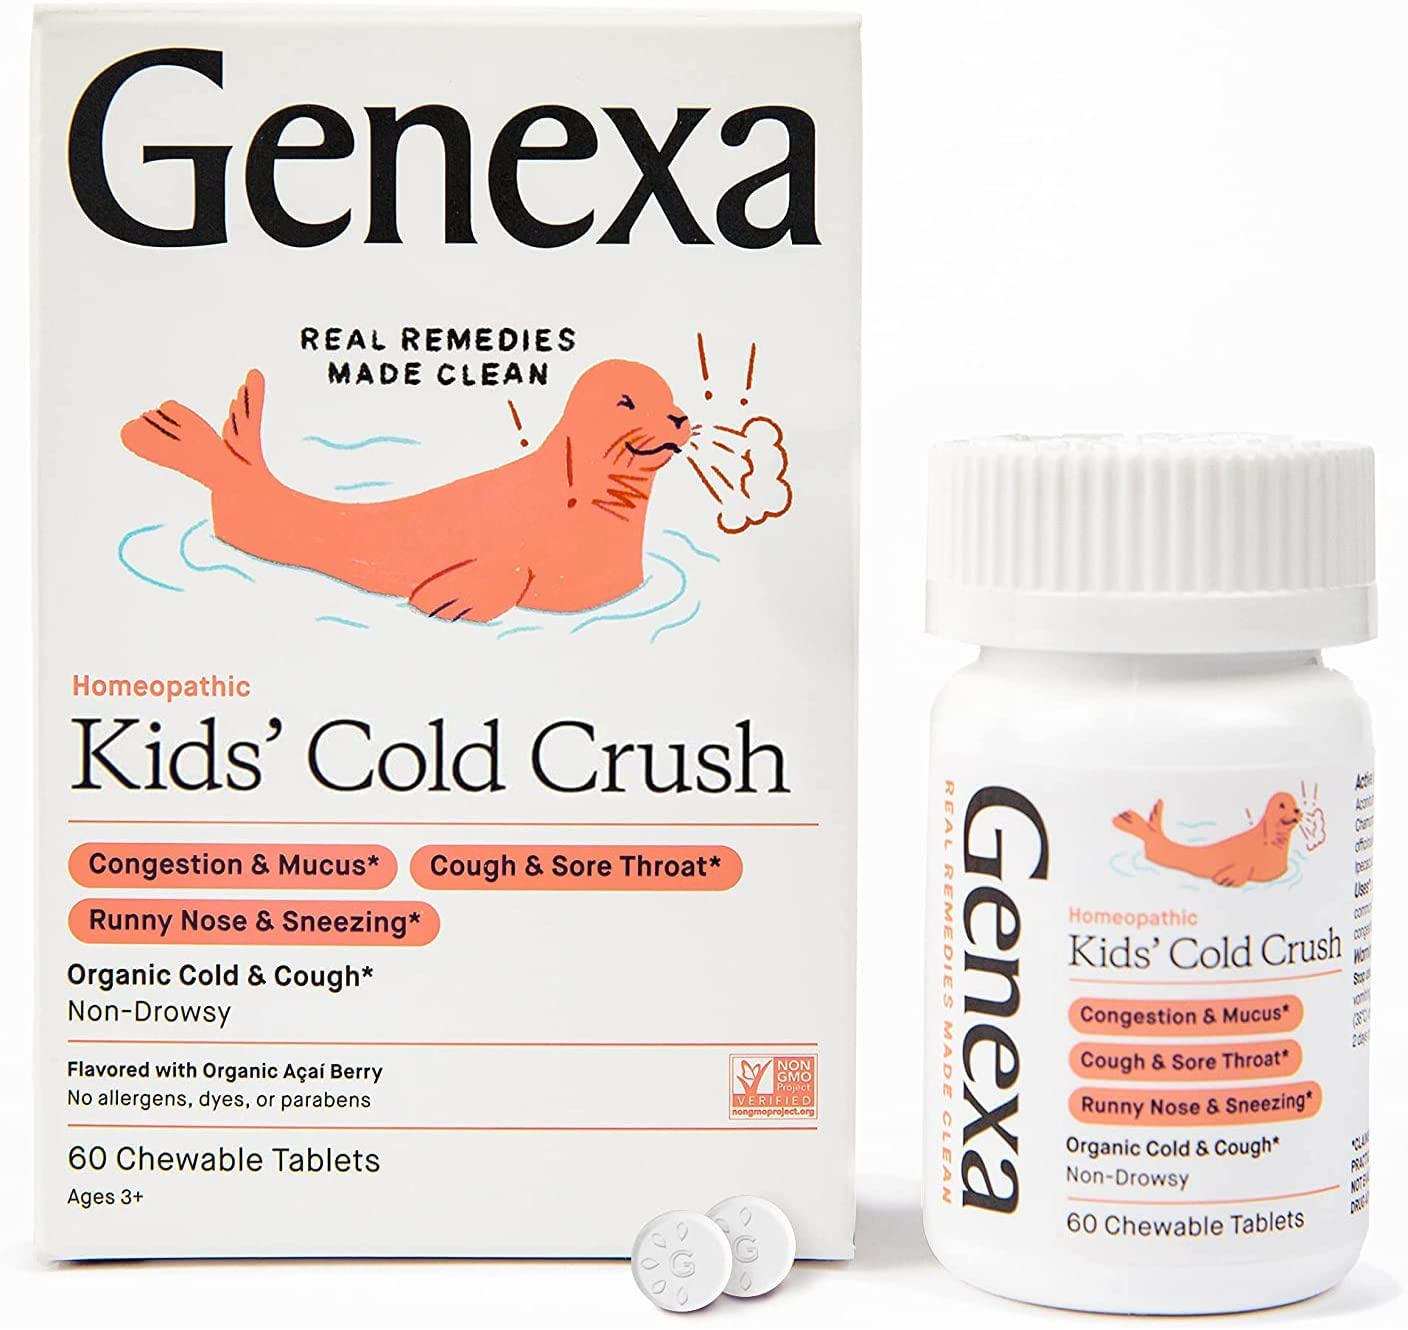 Kids' Cold Crush - 180 Tablets (3Pk) - Multi-Symptom Cough & Cold Remedy for Children - Certified Vegan, Organic, Gluten Free & Non-Gmo - Homeopathic Remedies